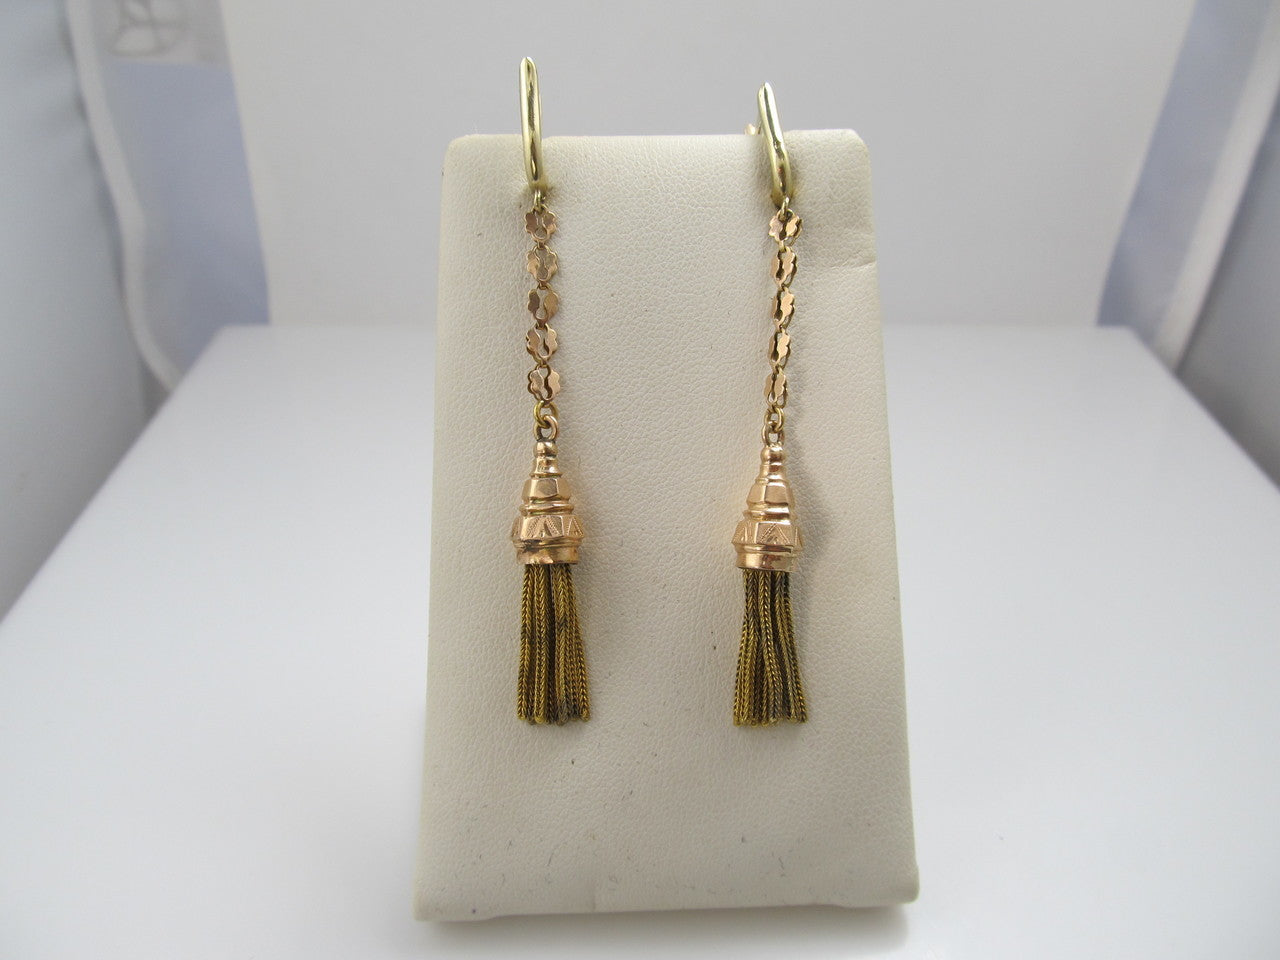 Antique 14k Rose And Yellow Gold Tassel Earrings, Circa 1880